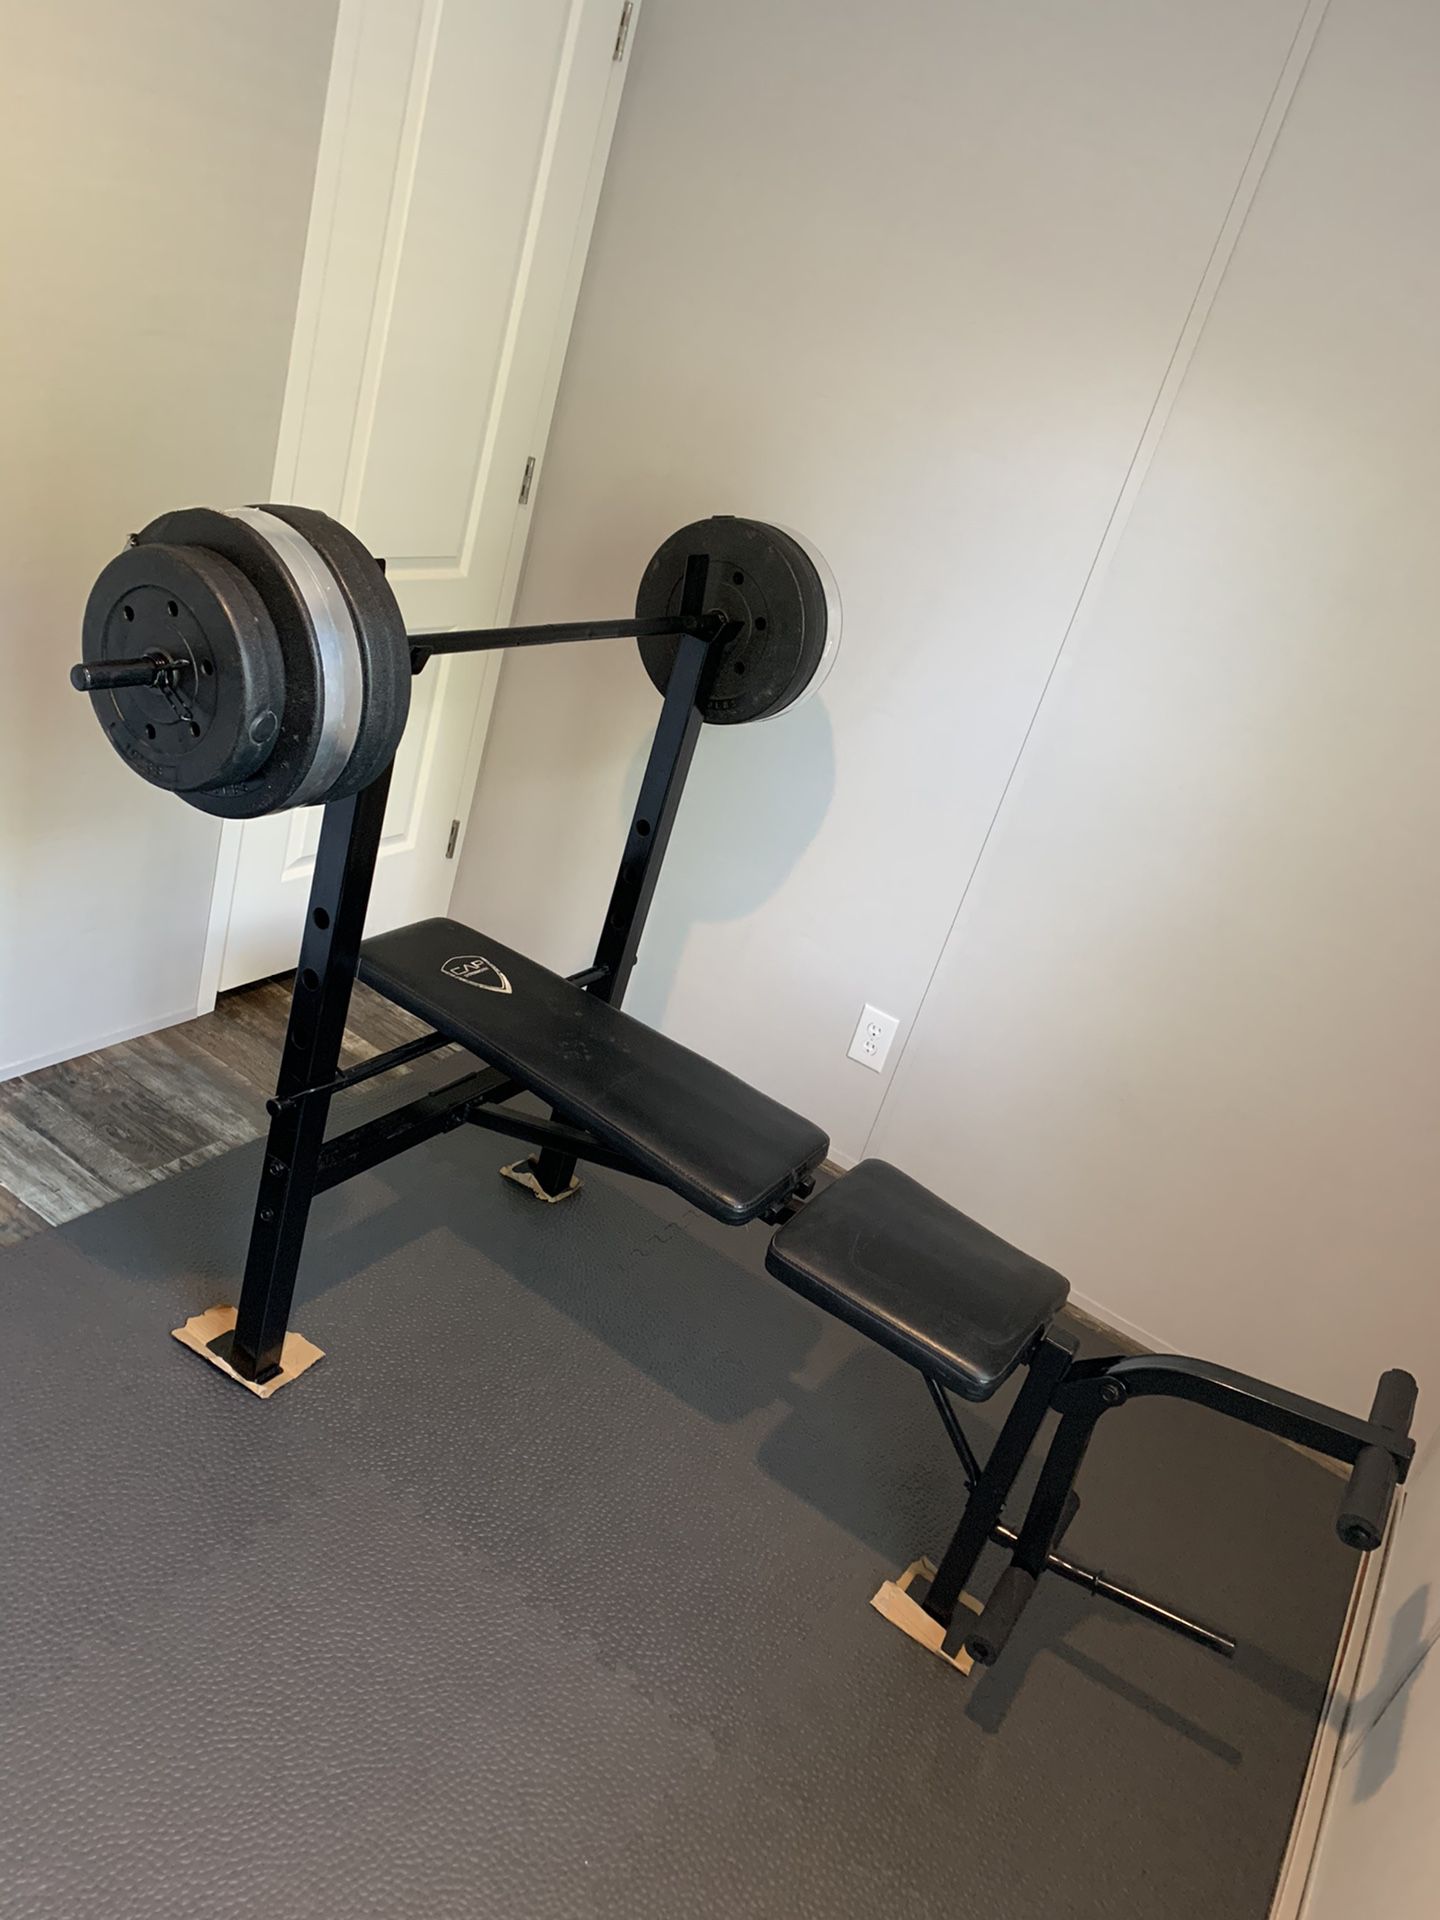 Adjustable bench press, with leg extensions and 100 lbs of weight